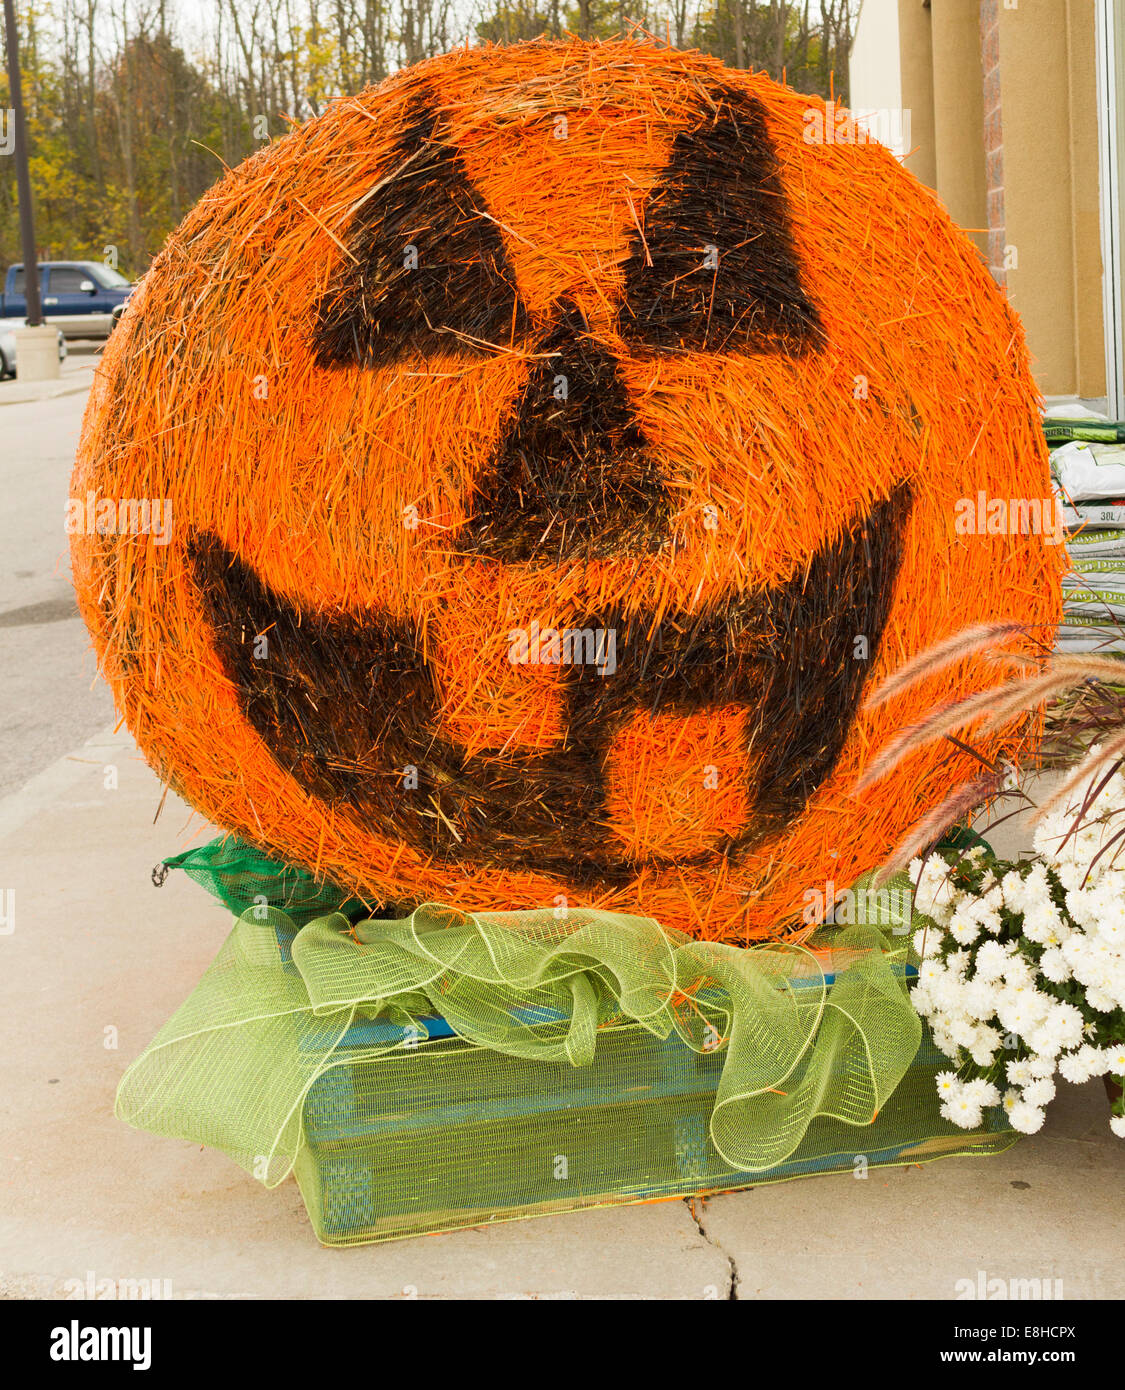 Round bale of hay painted to look like a hallowe'en pumpkin or jack-o-lantern. Stock Photo